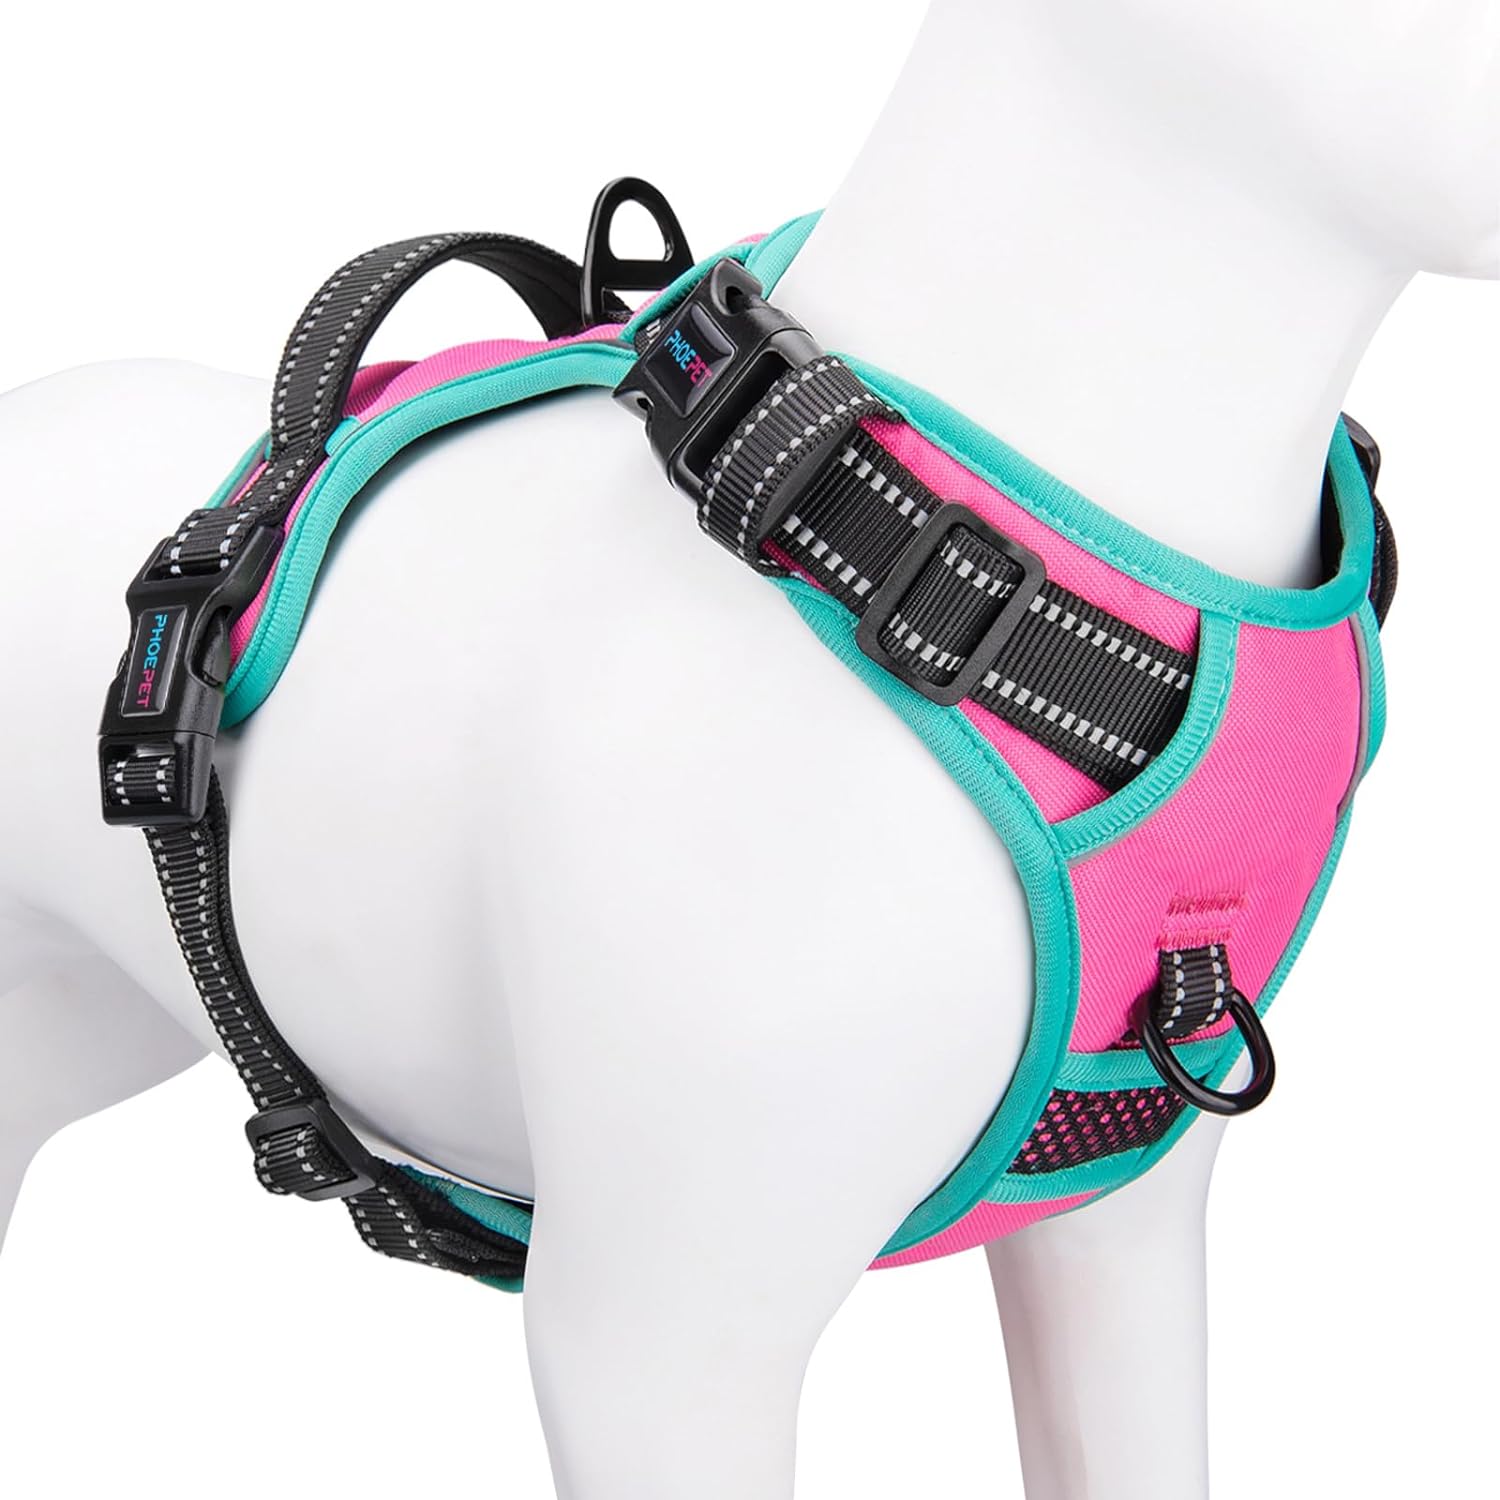 PHOEPET 2019 Upgraded No Pull Dog Harness, Reflective Adjustable Vest, with a Training Handle + 2 Metal Leash Hooks+ 3 Snap Buckles +4 Slide Buckles(L, Pink)